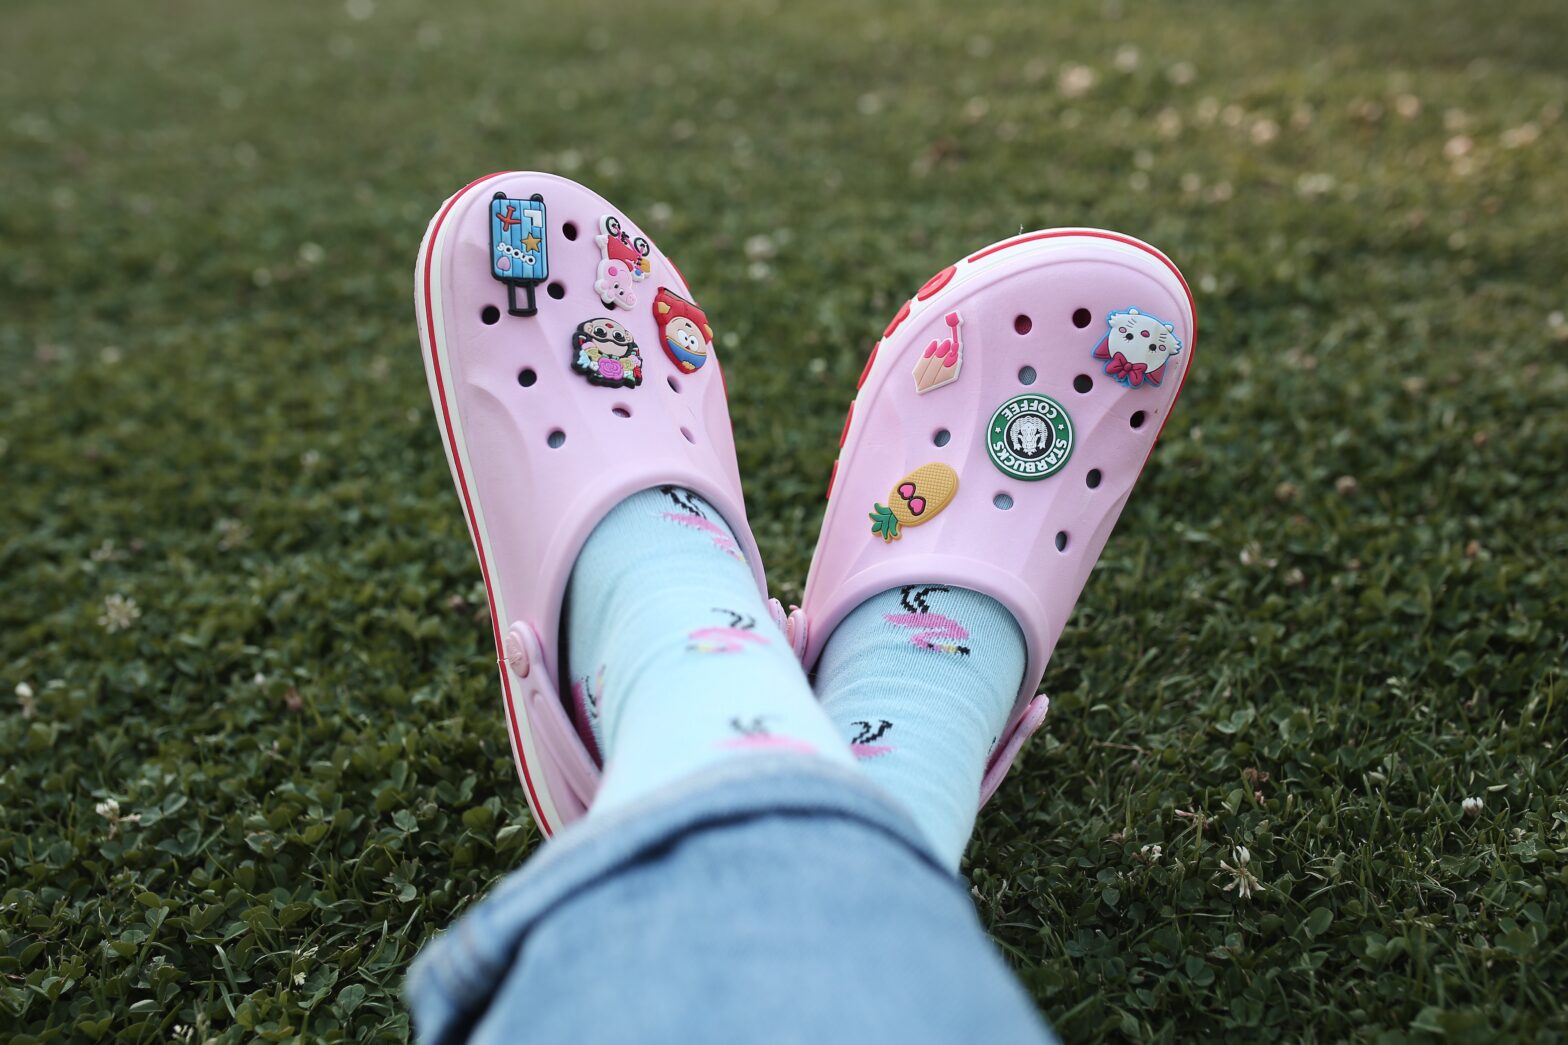 Pinks Crocs on woman's feet at the park in green grass - Best Crocs For Adventure